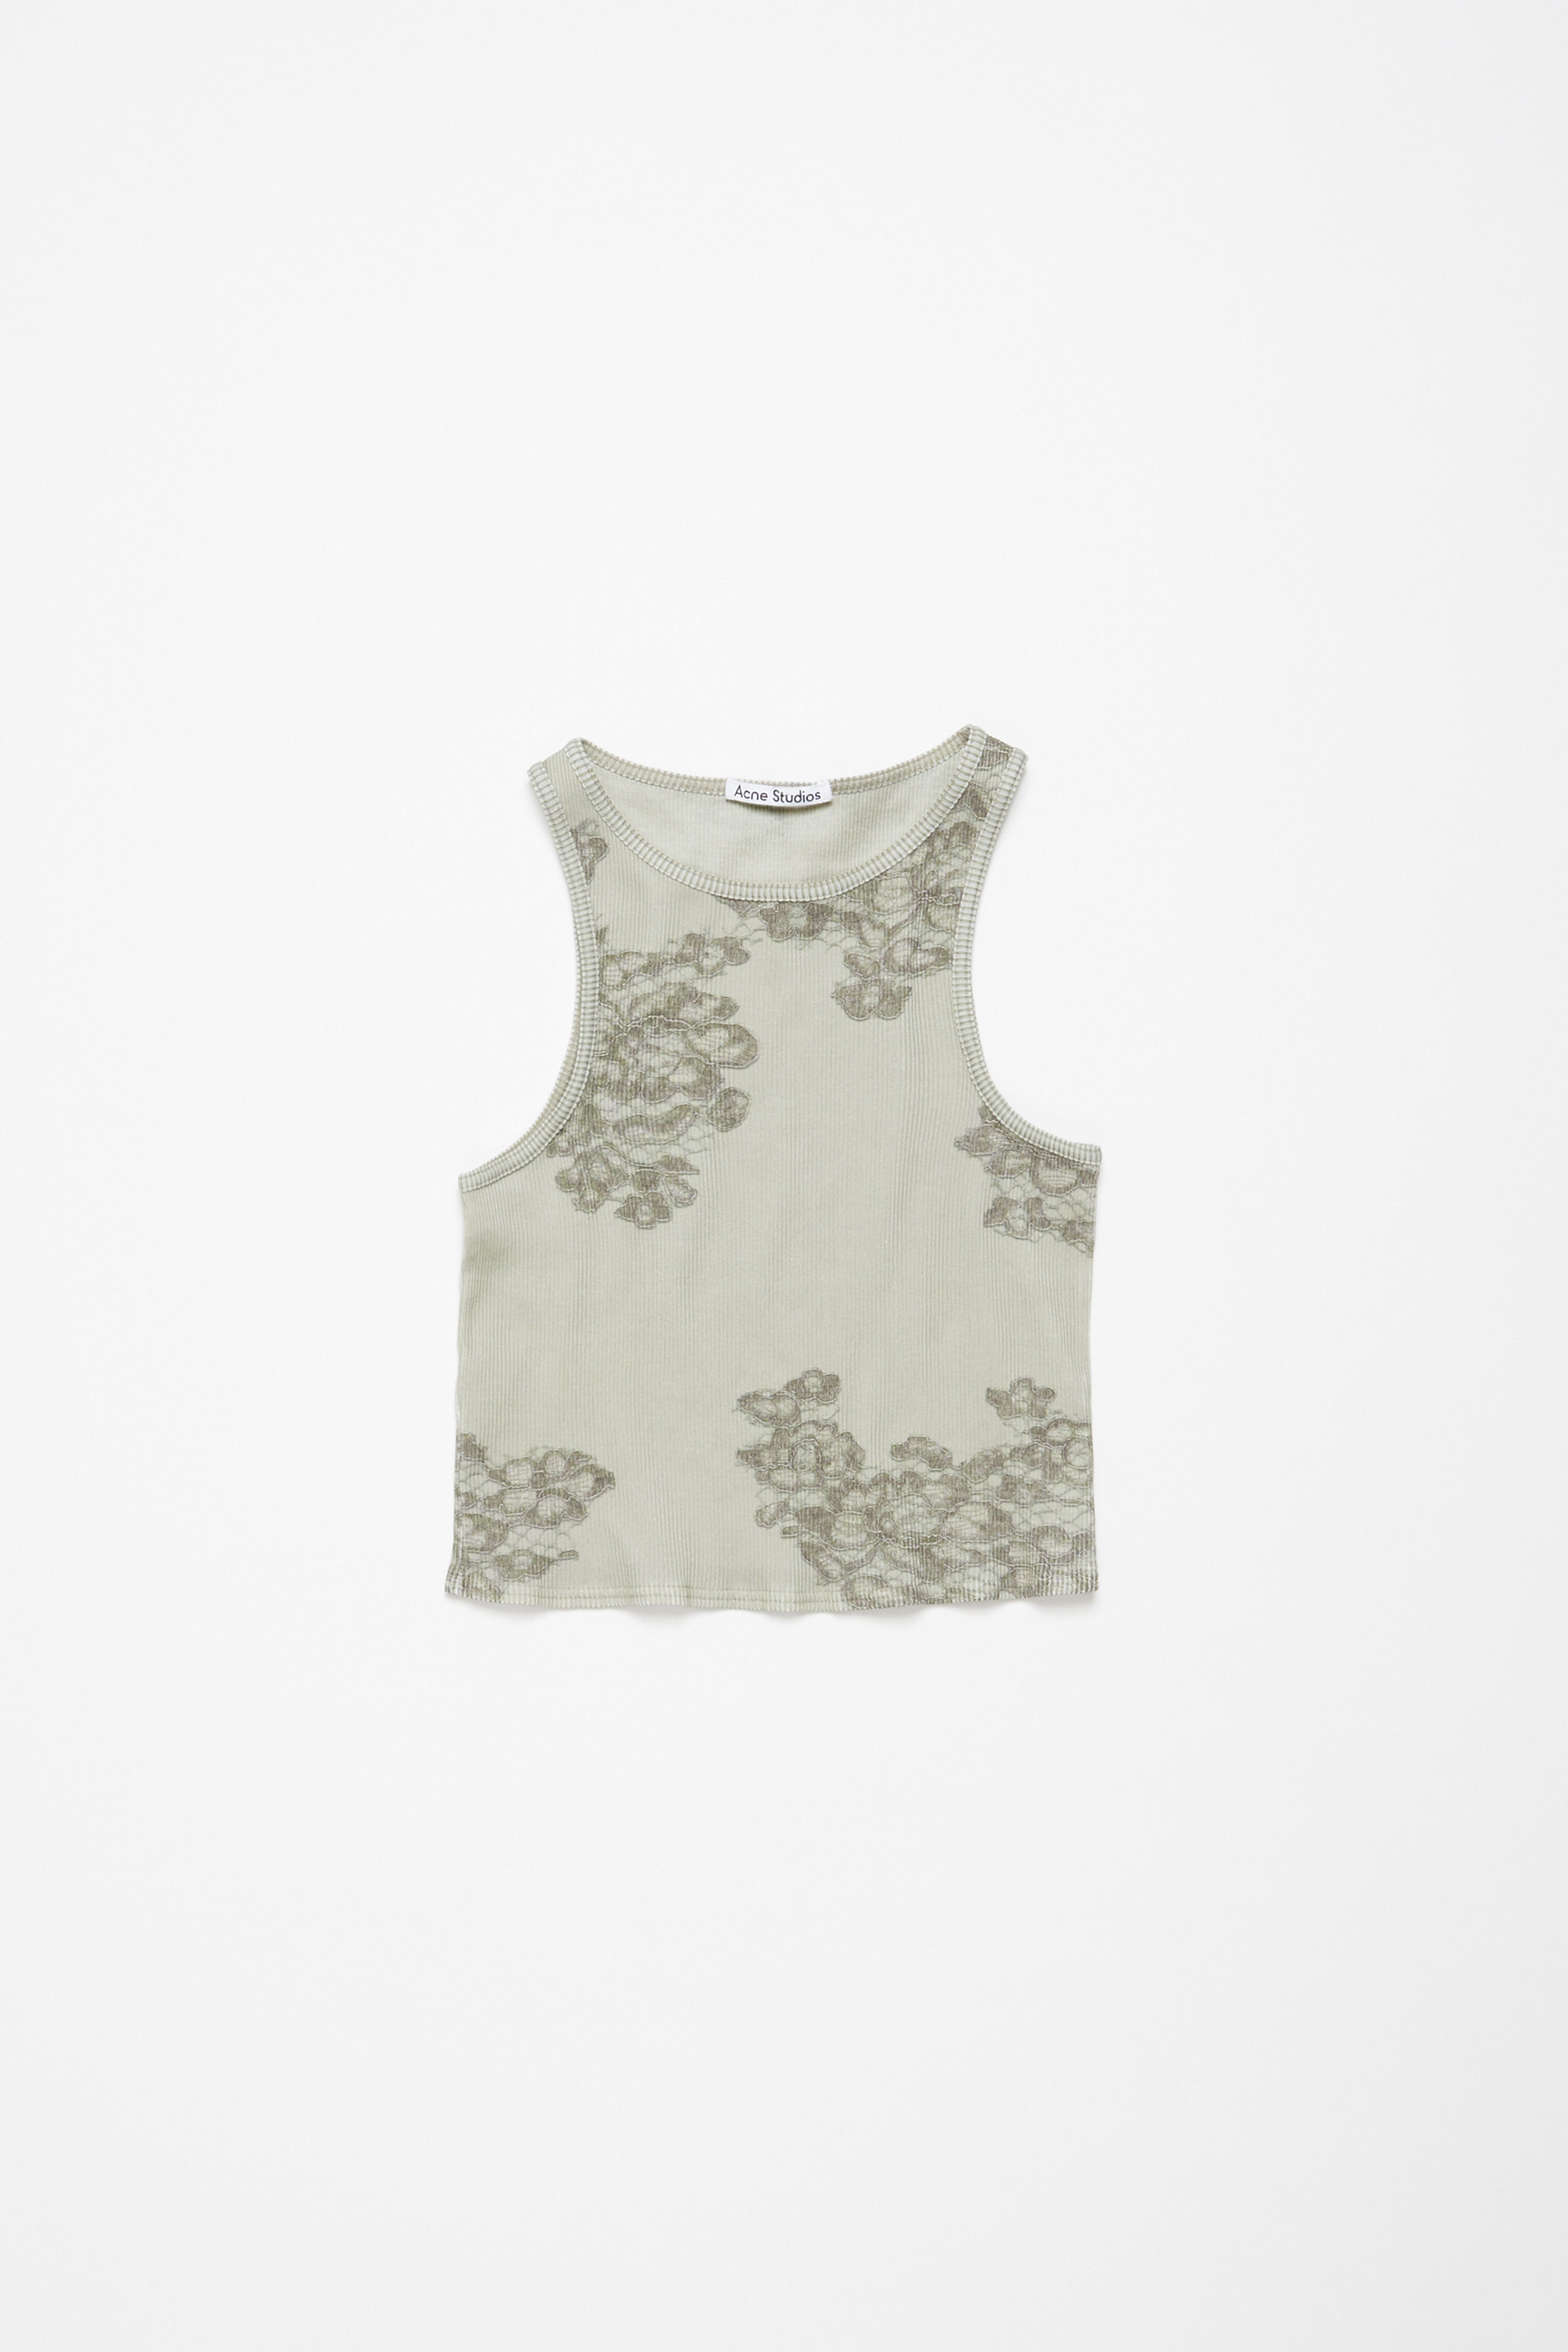 Printed lace tank top